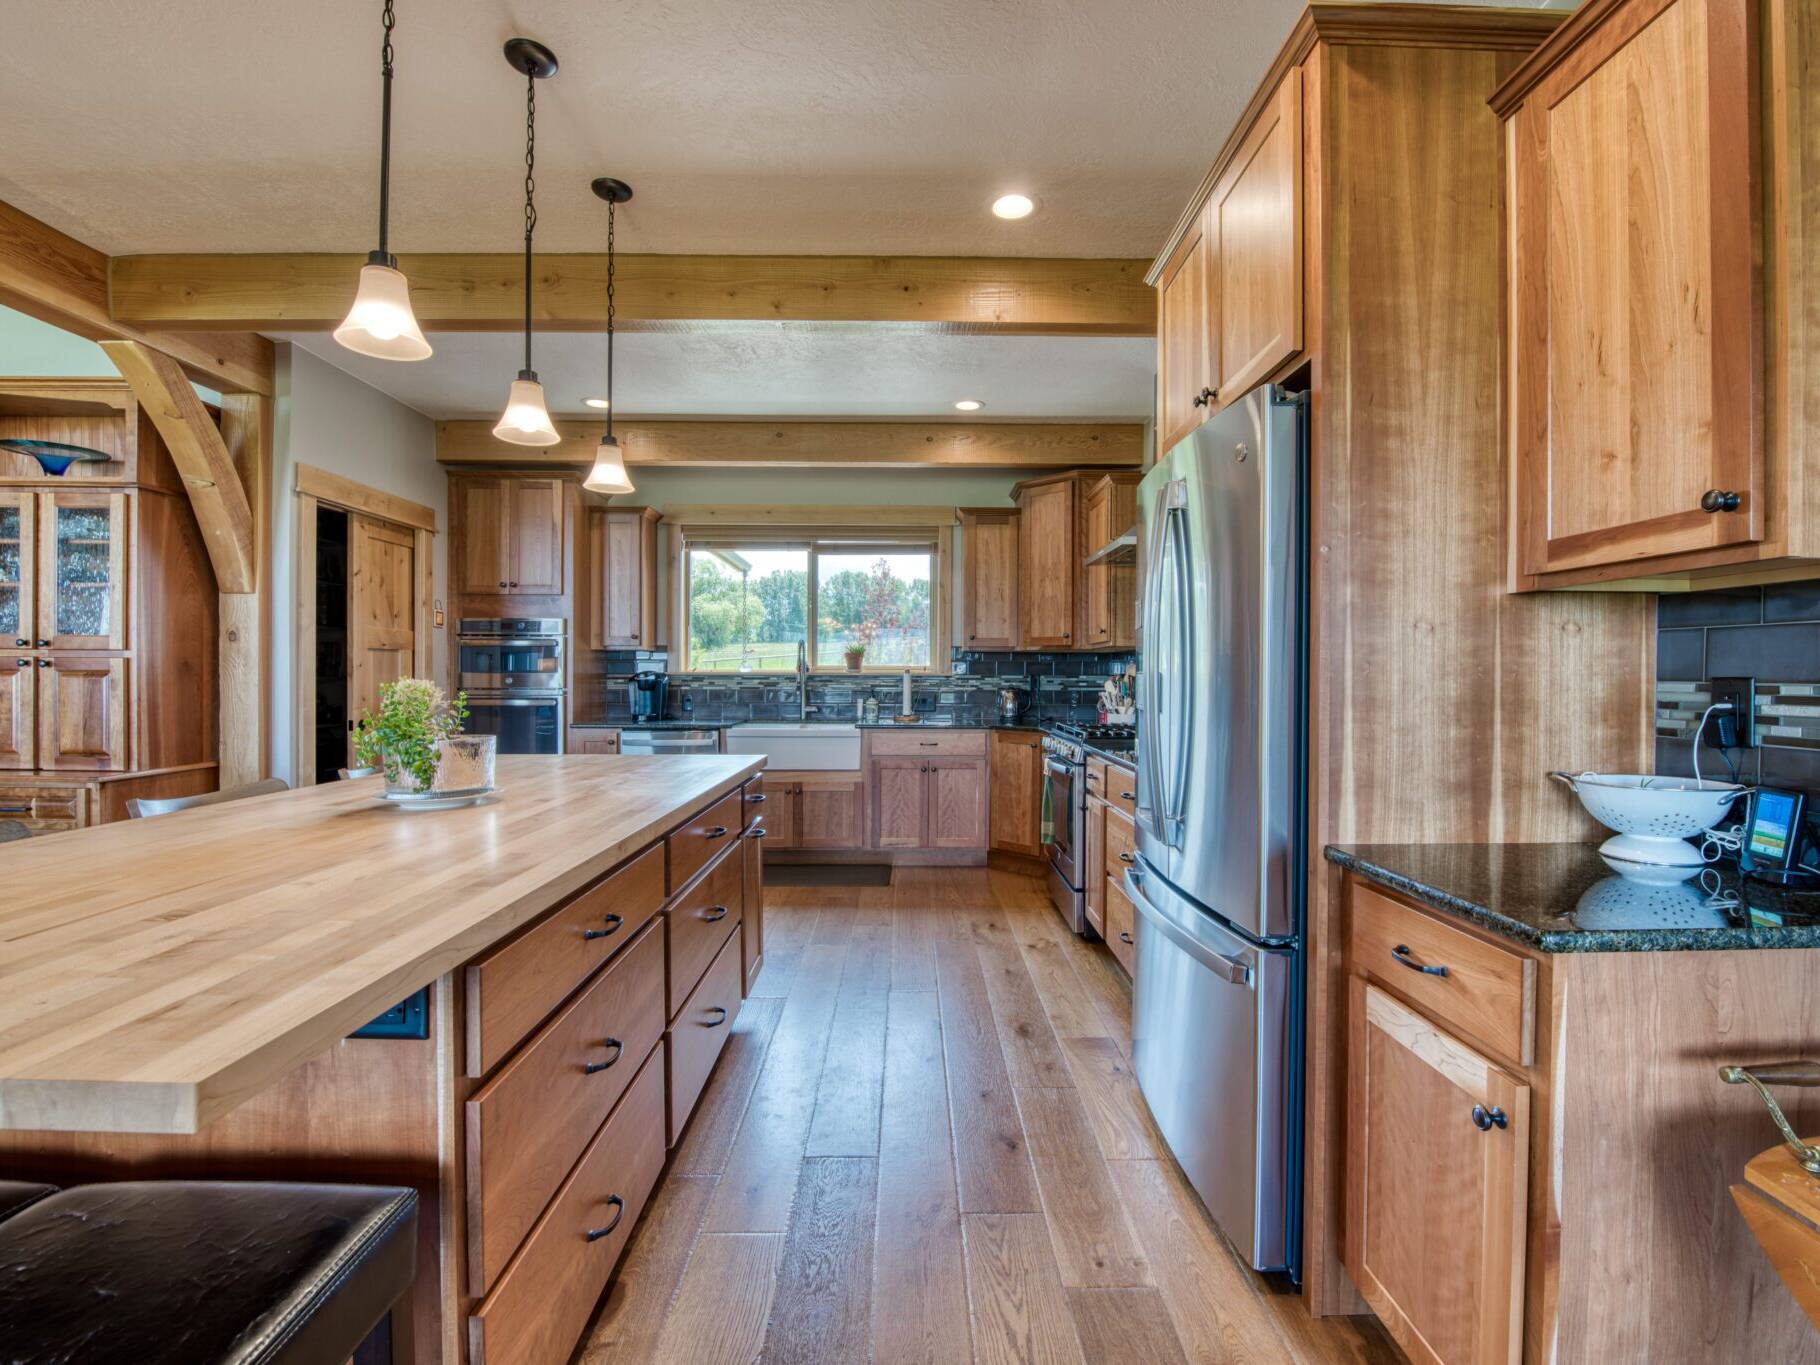 Kitchen with butcher block island countertop and wood beam work in a custom home built by Big Sky Builders in Stevensville, MT